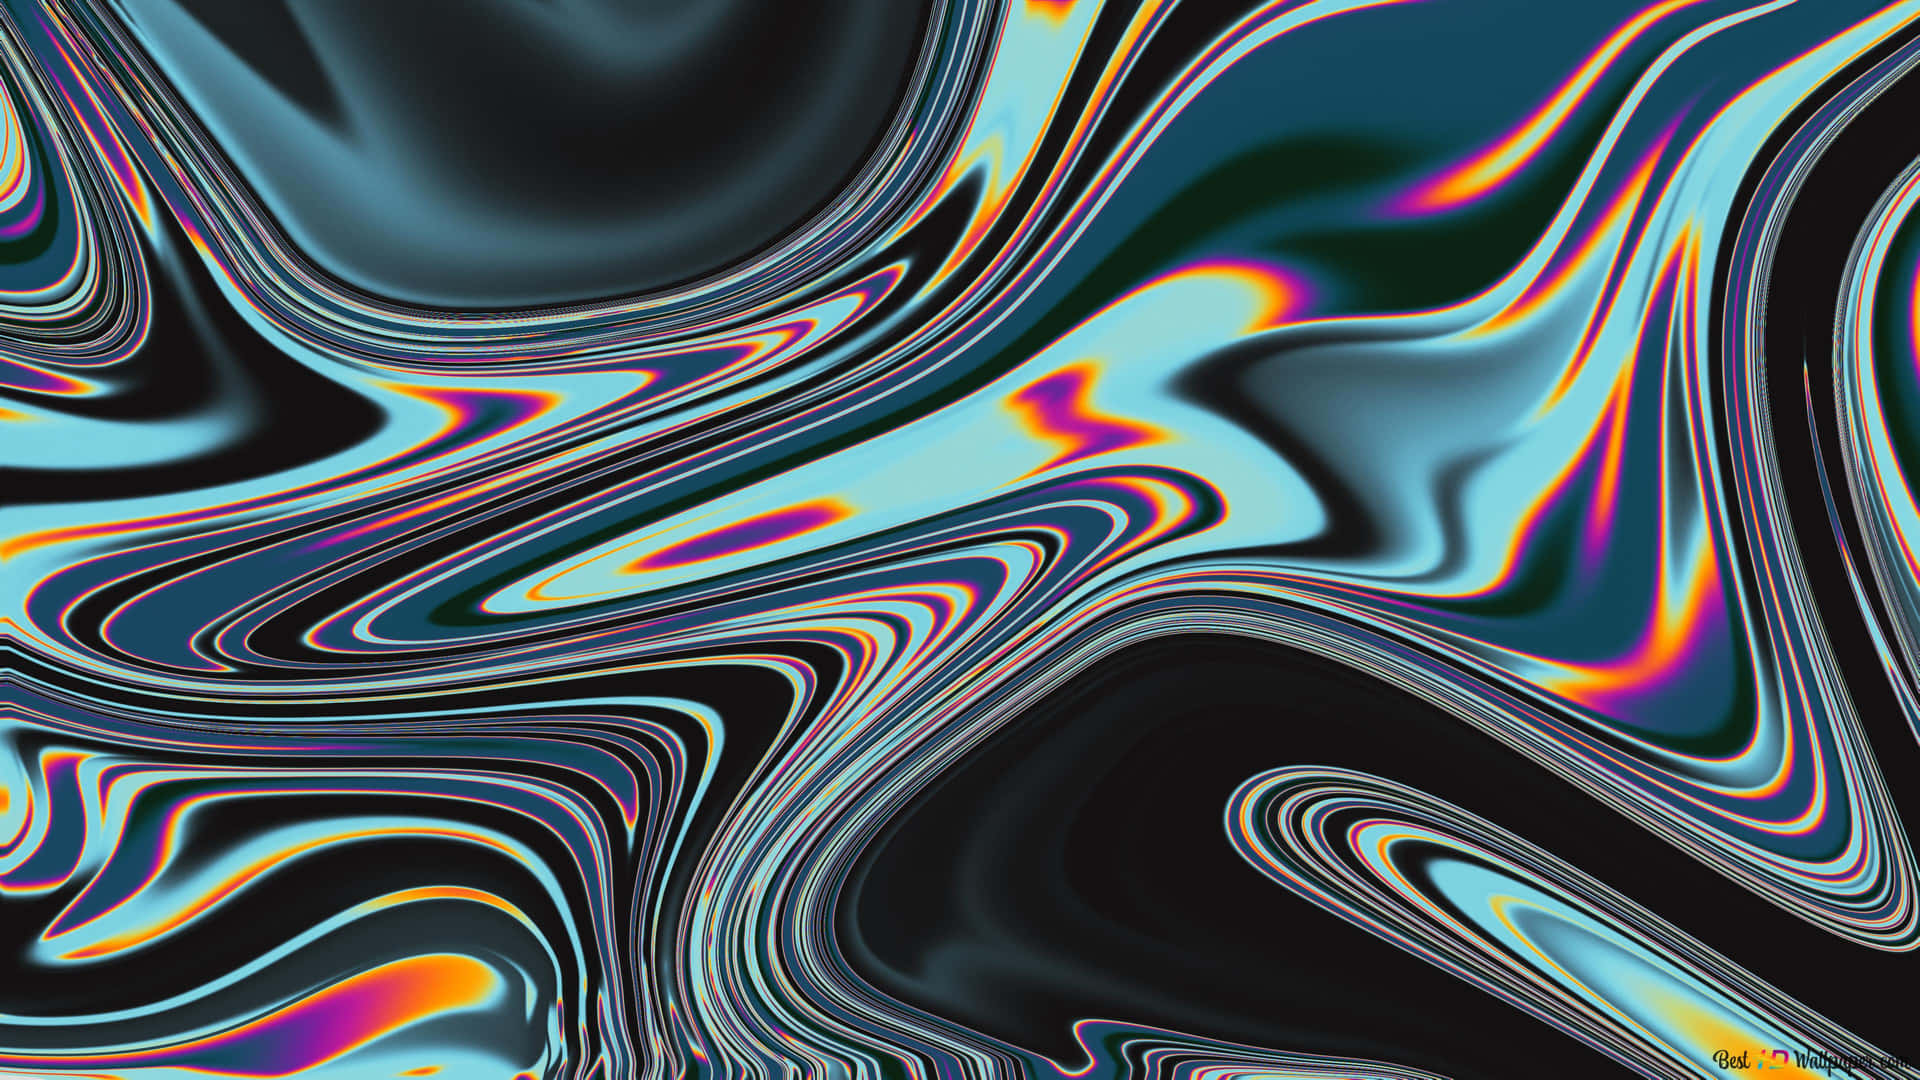 Create your own colorful masterpiece with these Psychedelic Colors Wallpaper